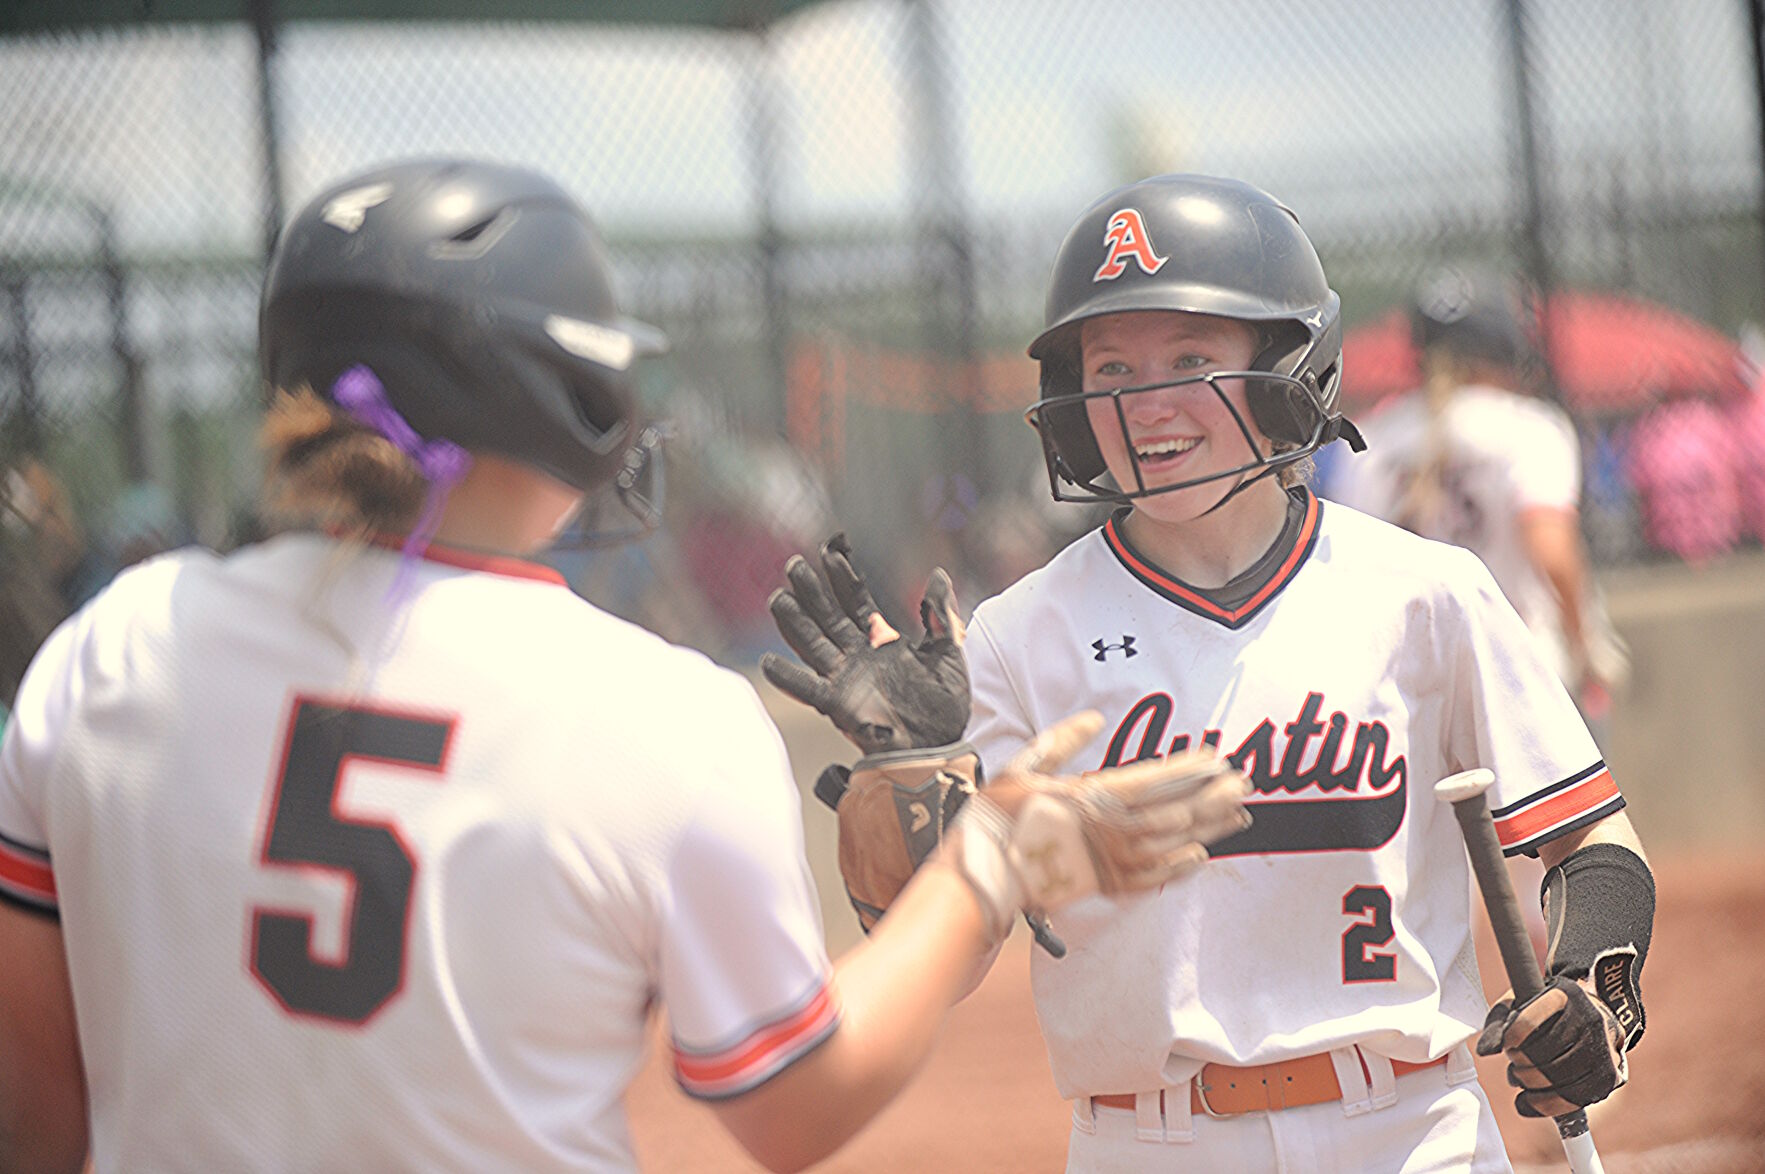 Austin falls one game shy of state tournament